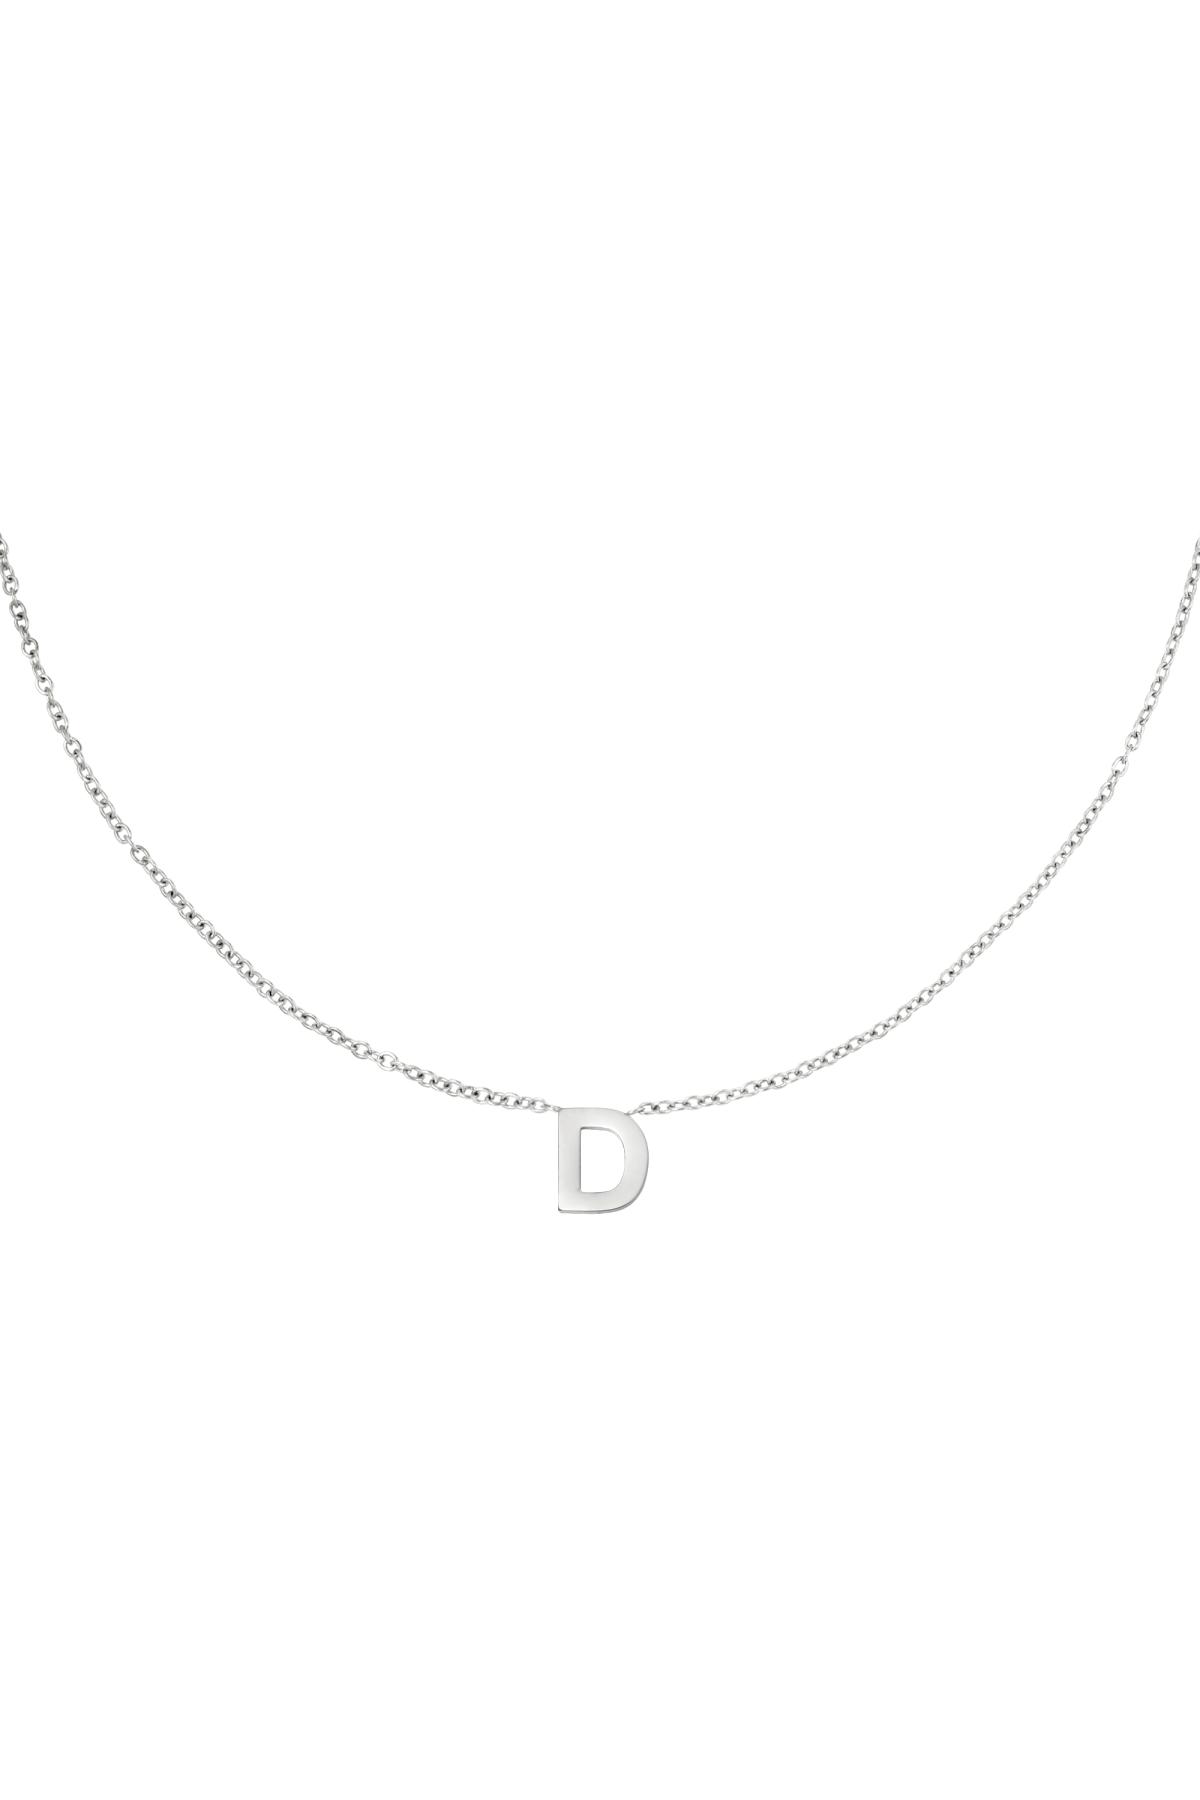 Silver / Stainless steel necklace initial D Silver Picture4